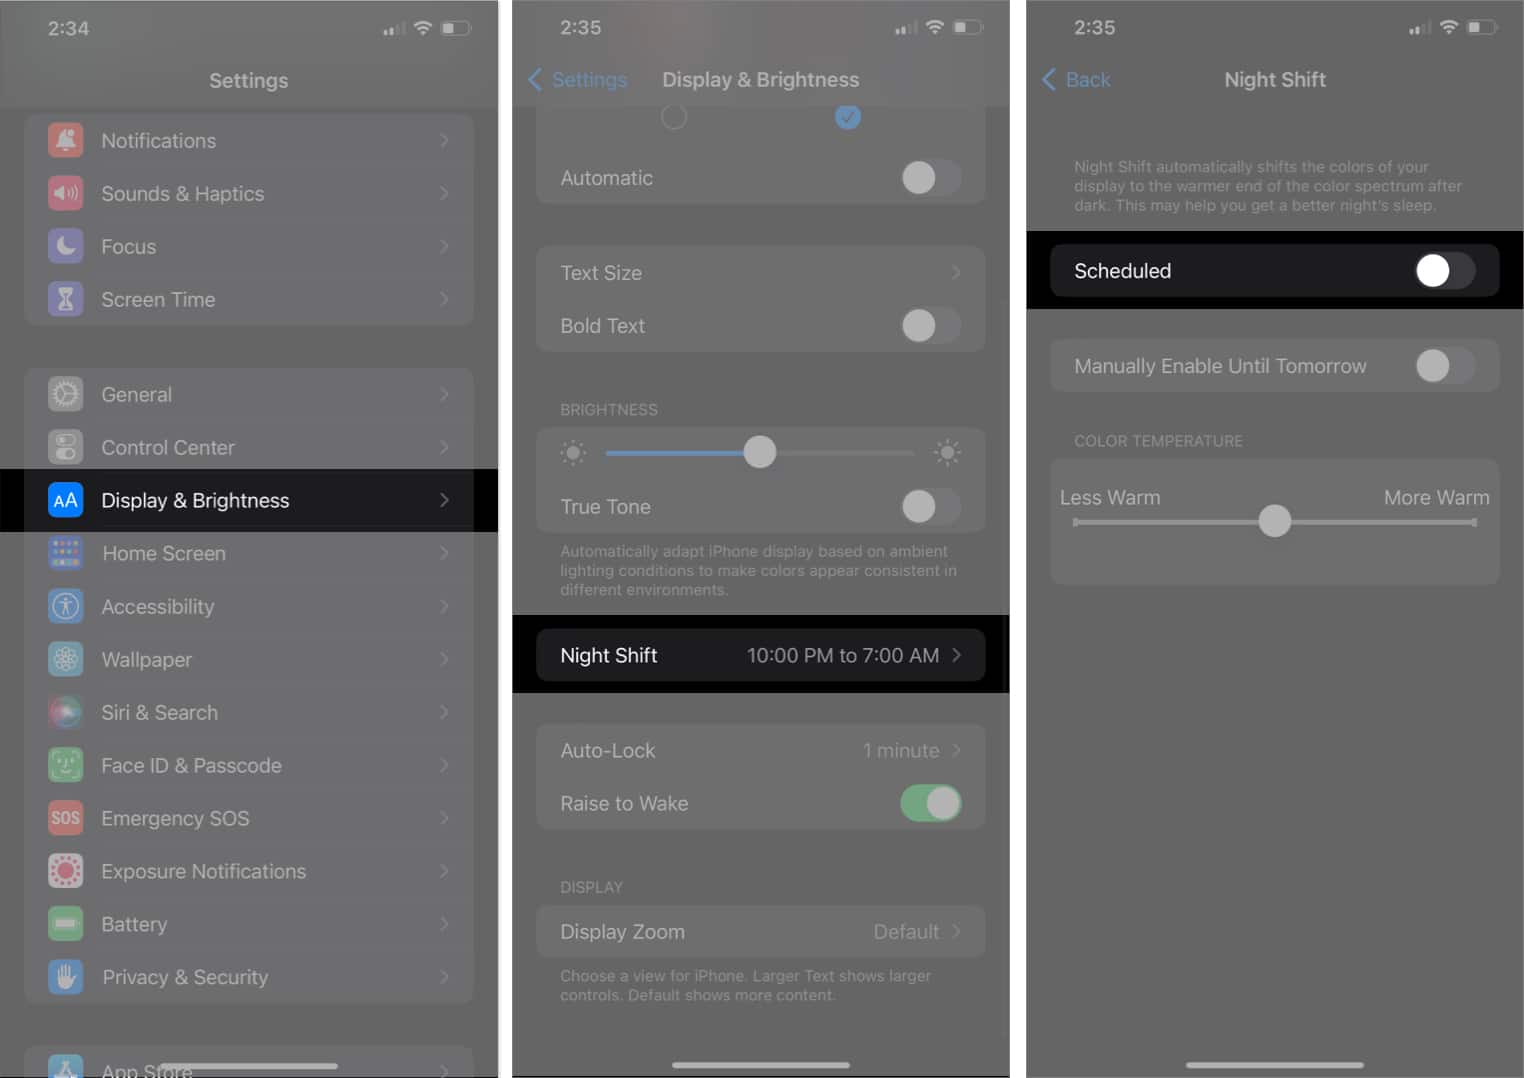 Launch Settings app, head to Display & Brightness, tap Night Shift, and toggle off the button next to Scheduled